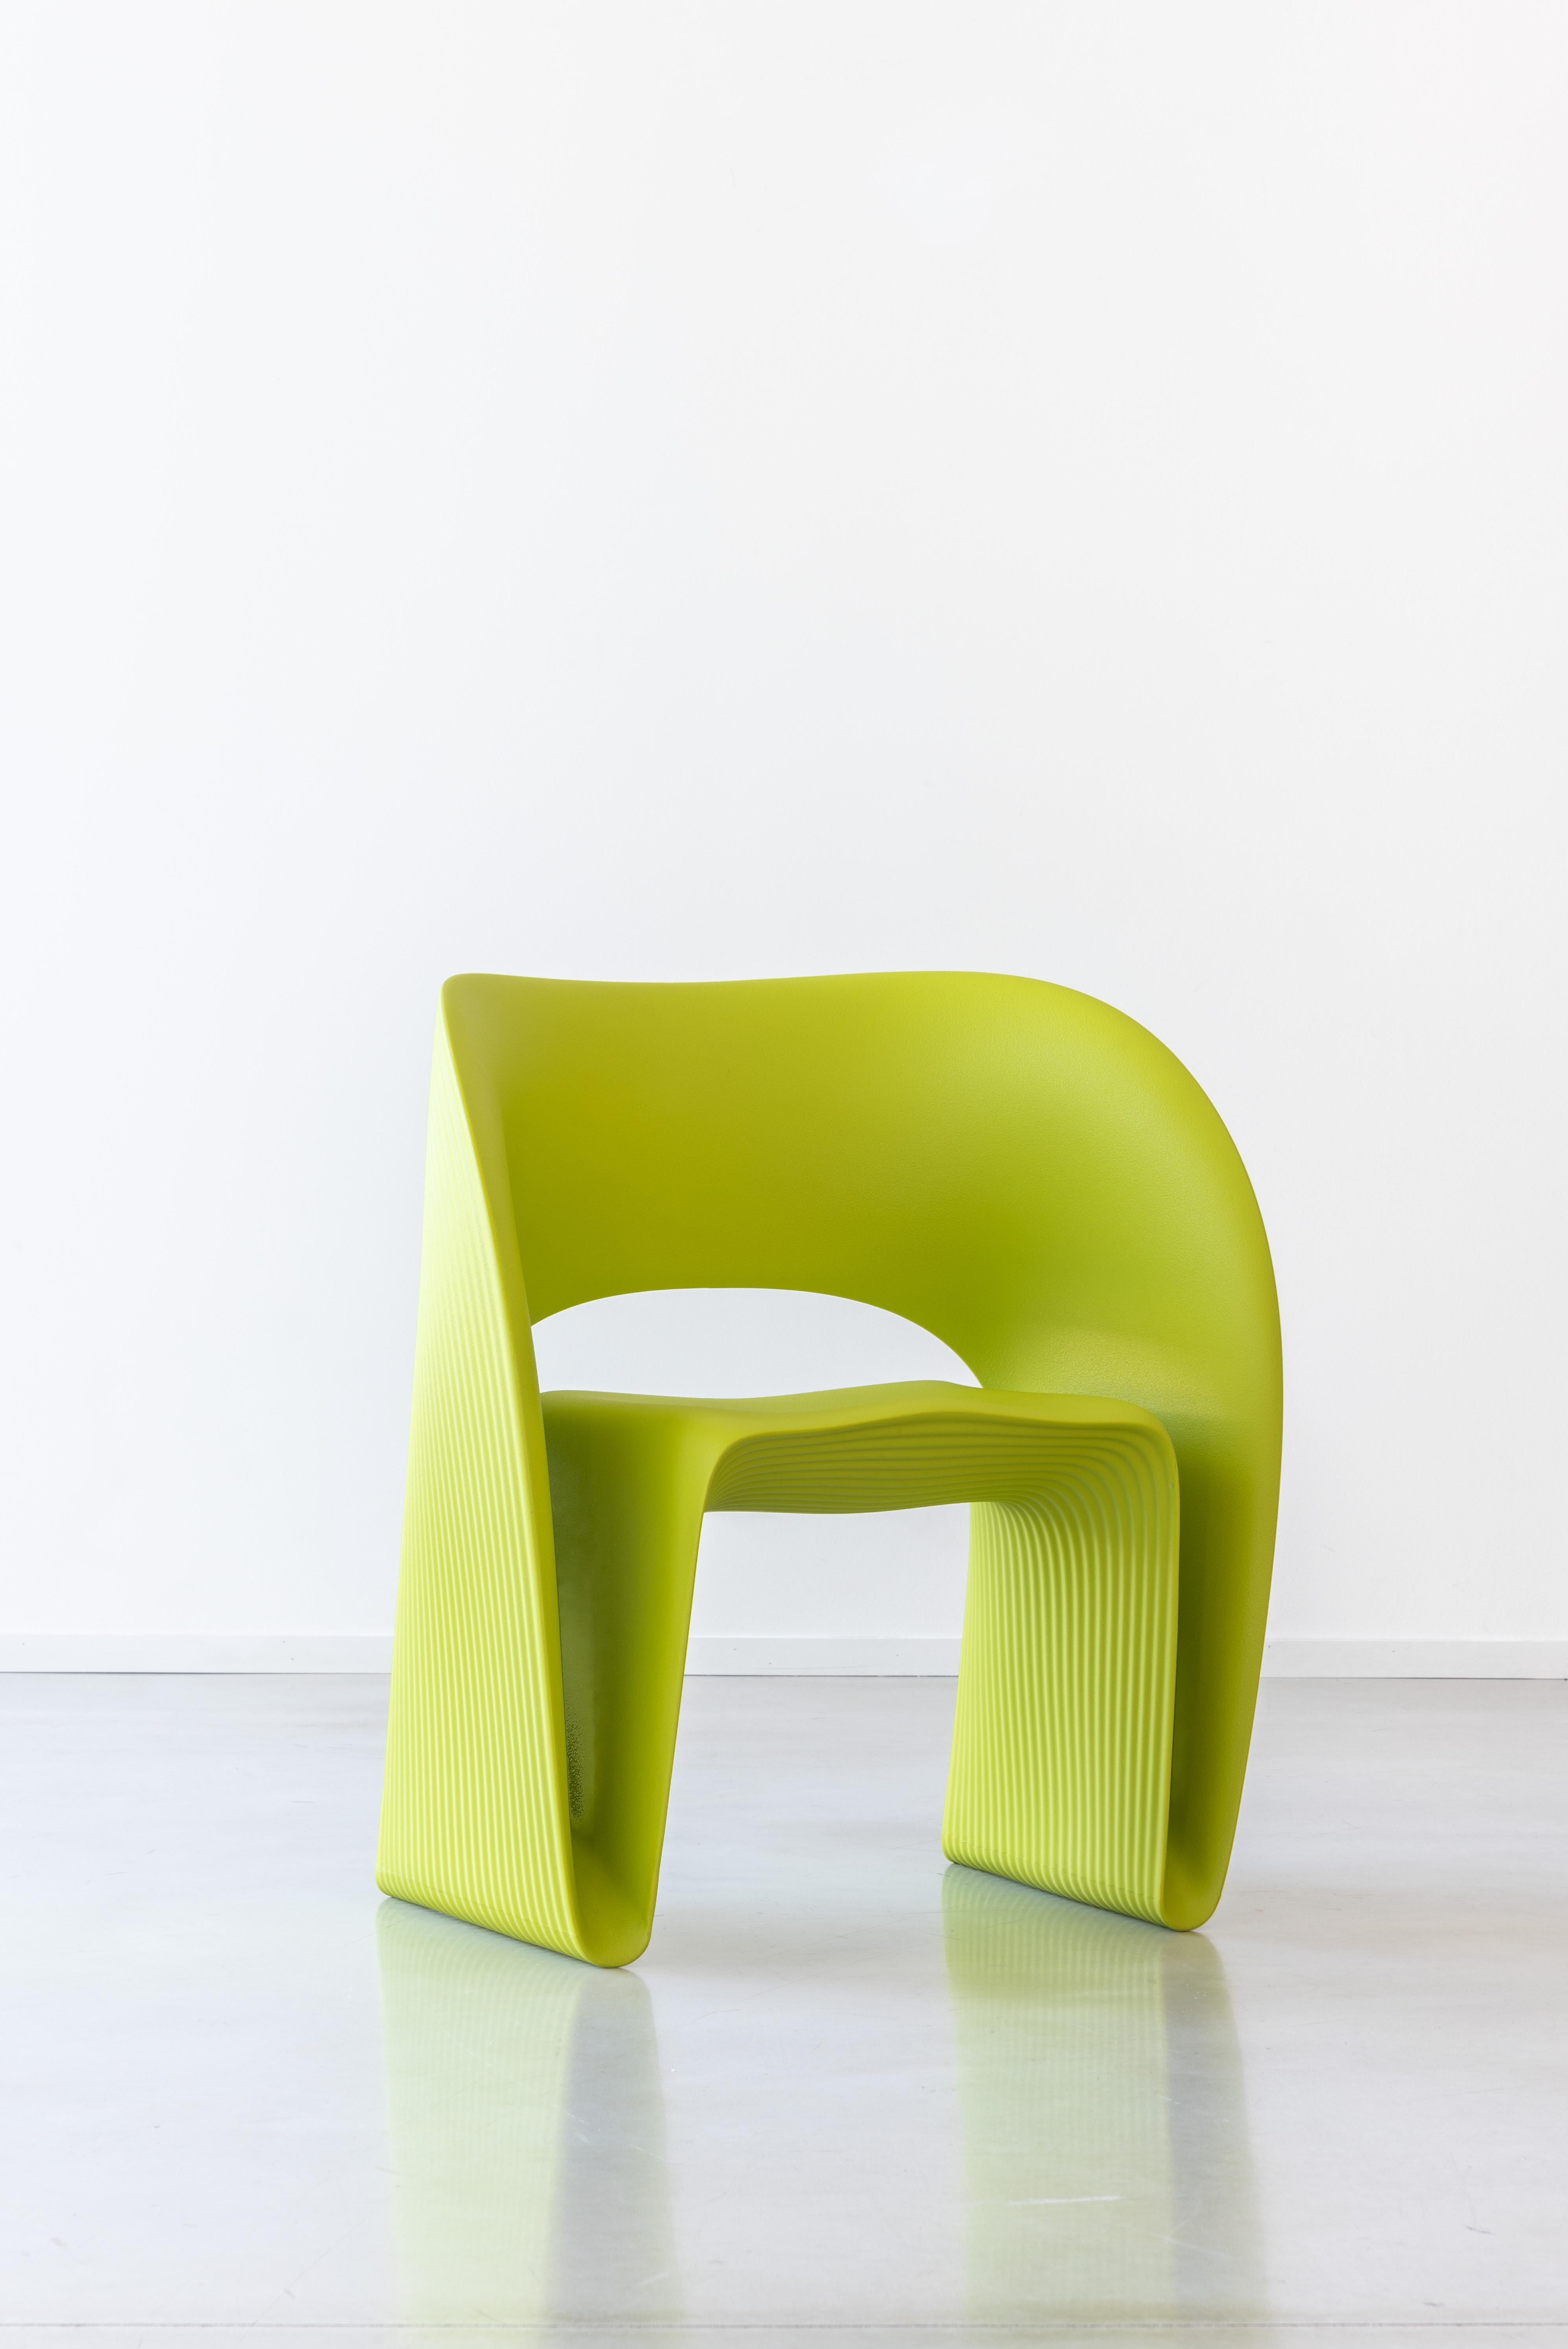 Raviolo LowChair in Olive Green  by Ron Arad for MAGIS For Sale 7